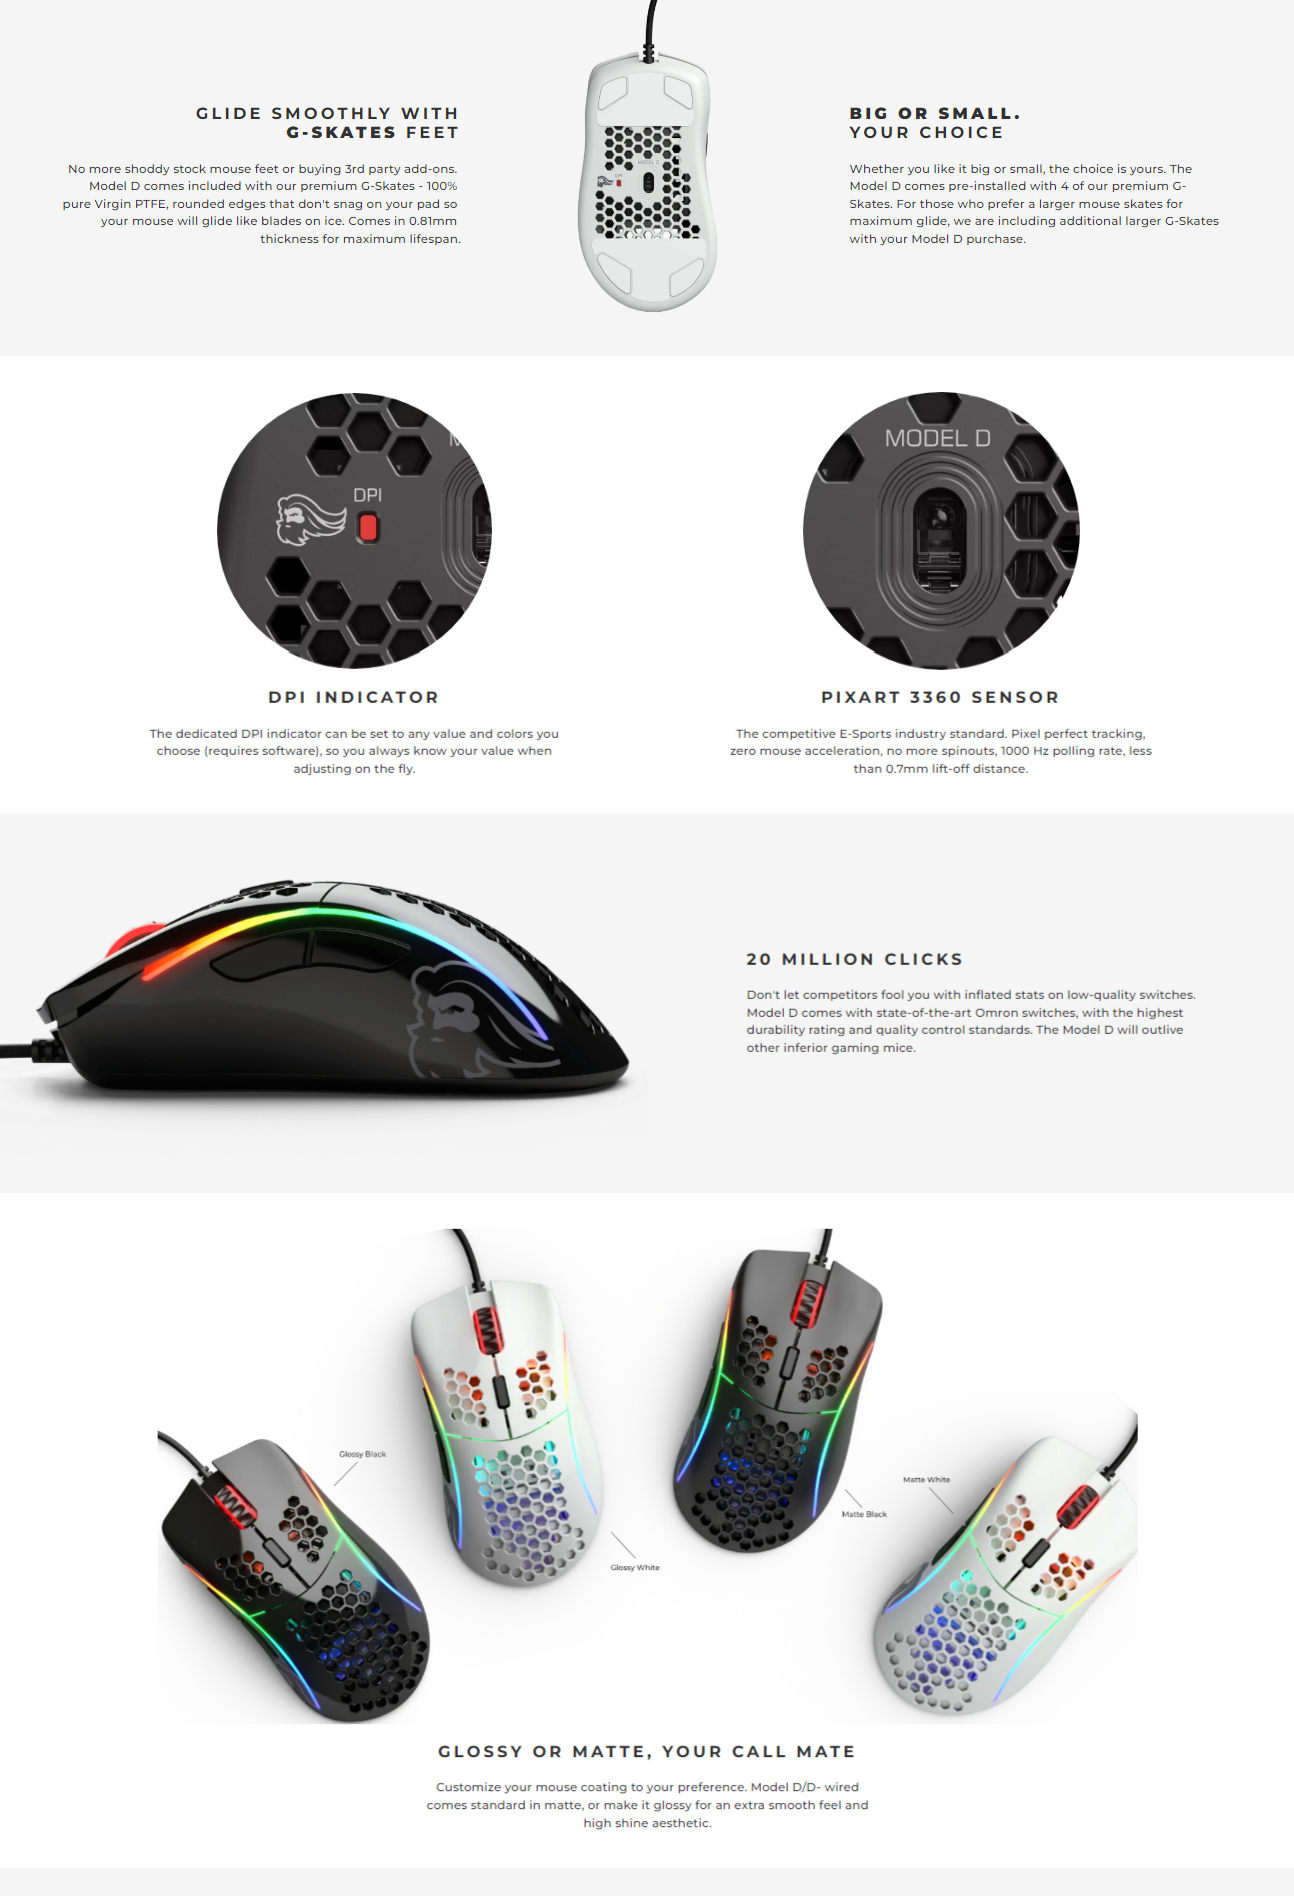 A large marketing image providing additional information about the product Glorious Model D Wired Gaming Mouse - Matte Black - Additional alt info not provided